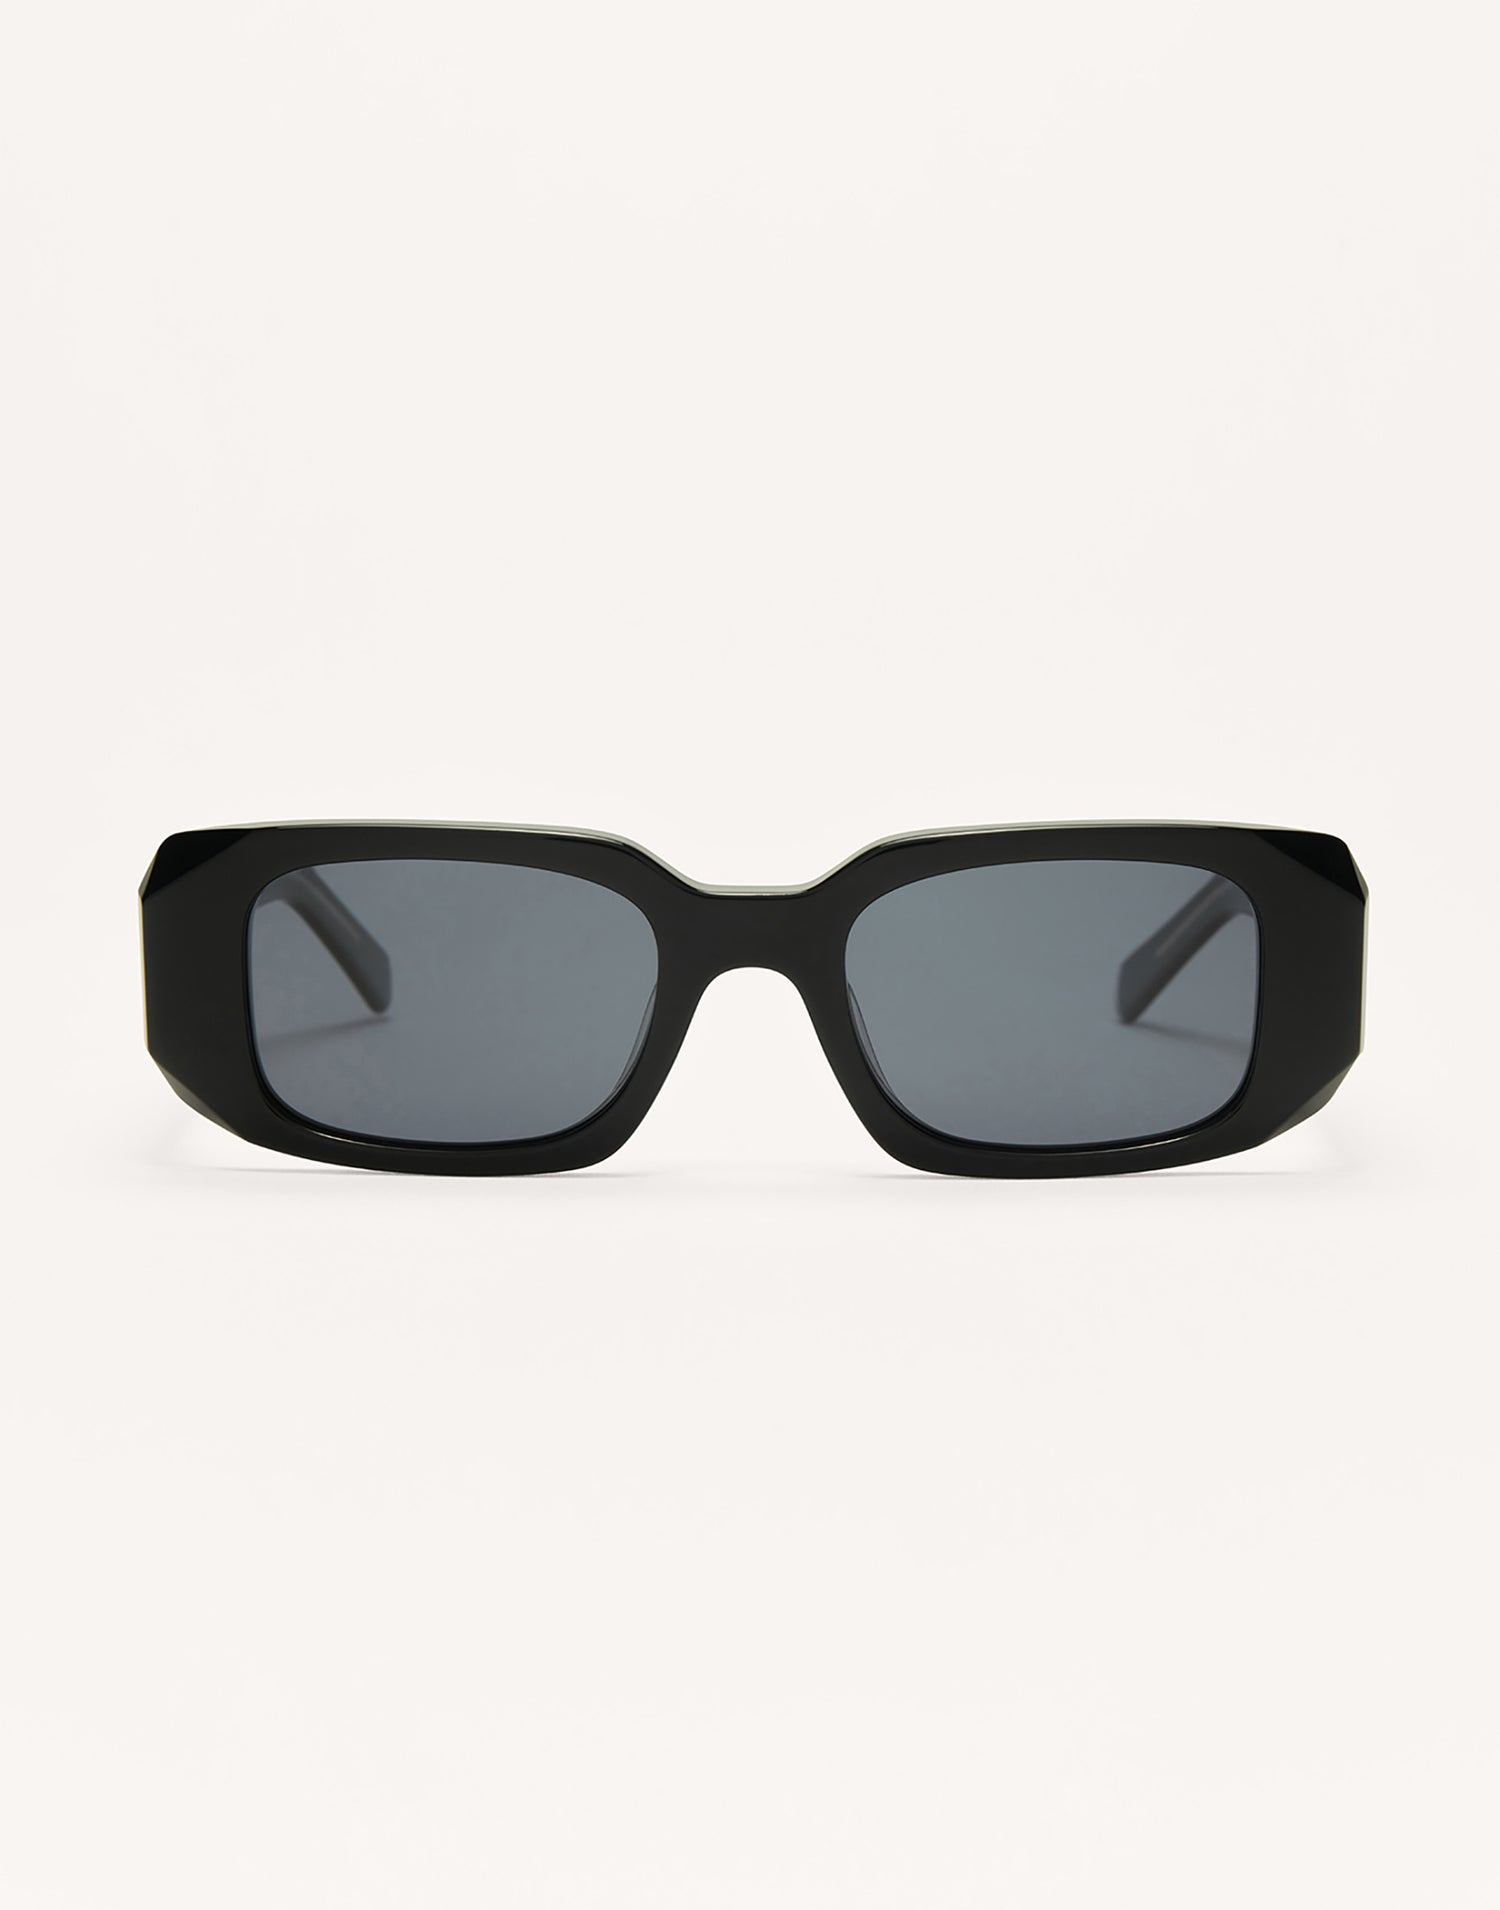 Off Duty Sunglasses by Z Supply in Polished Black - Front View